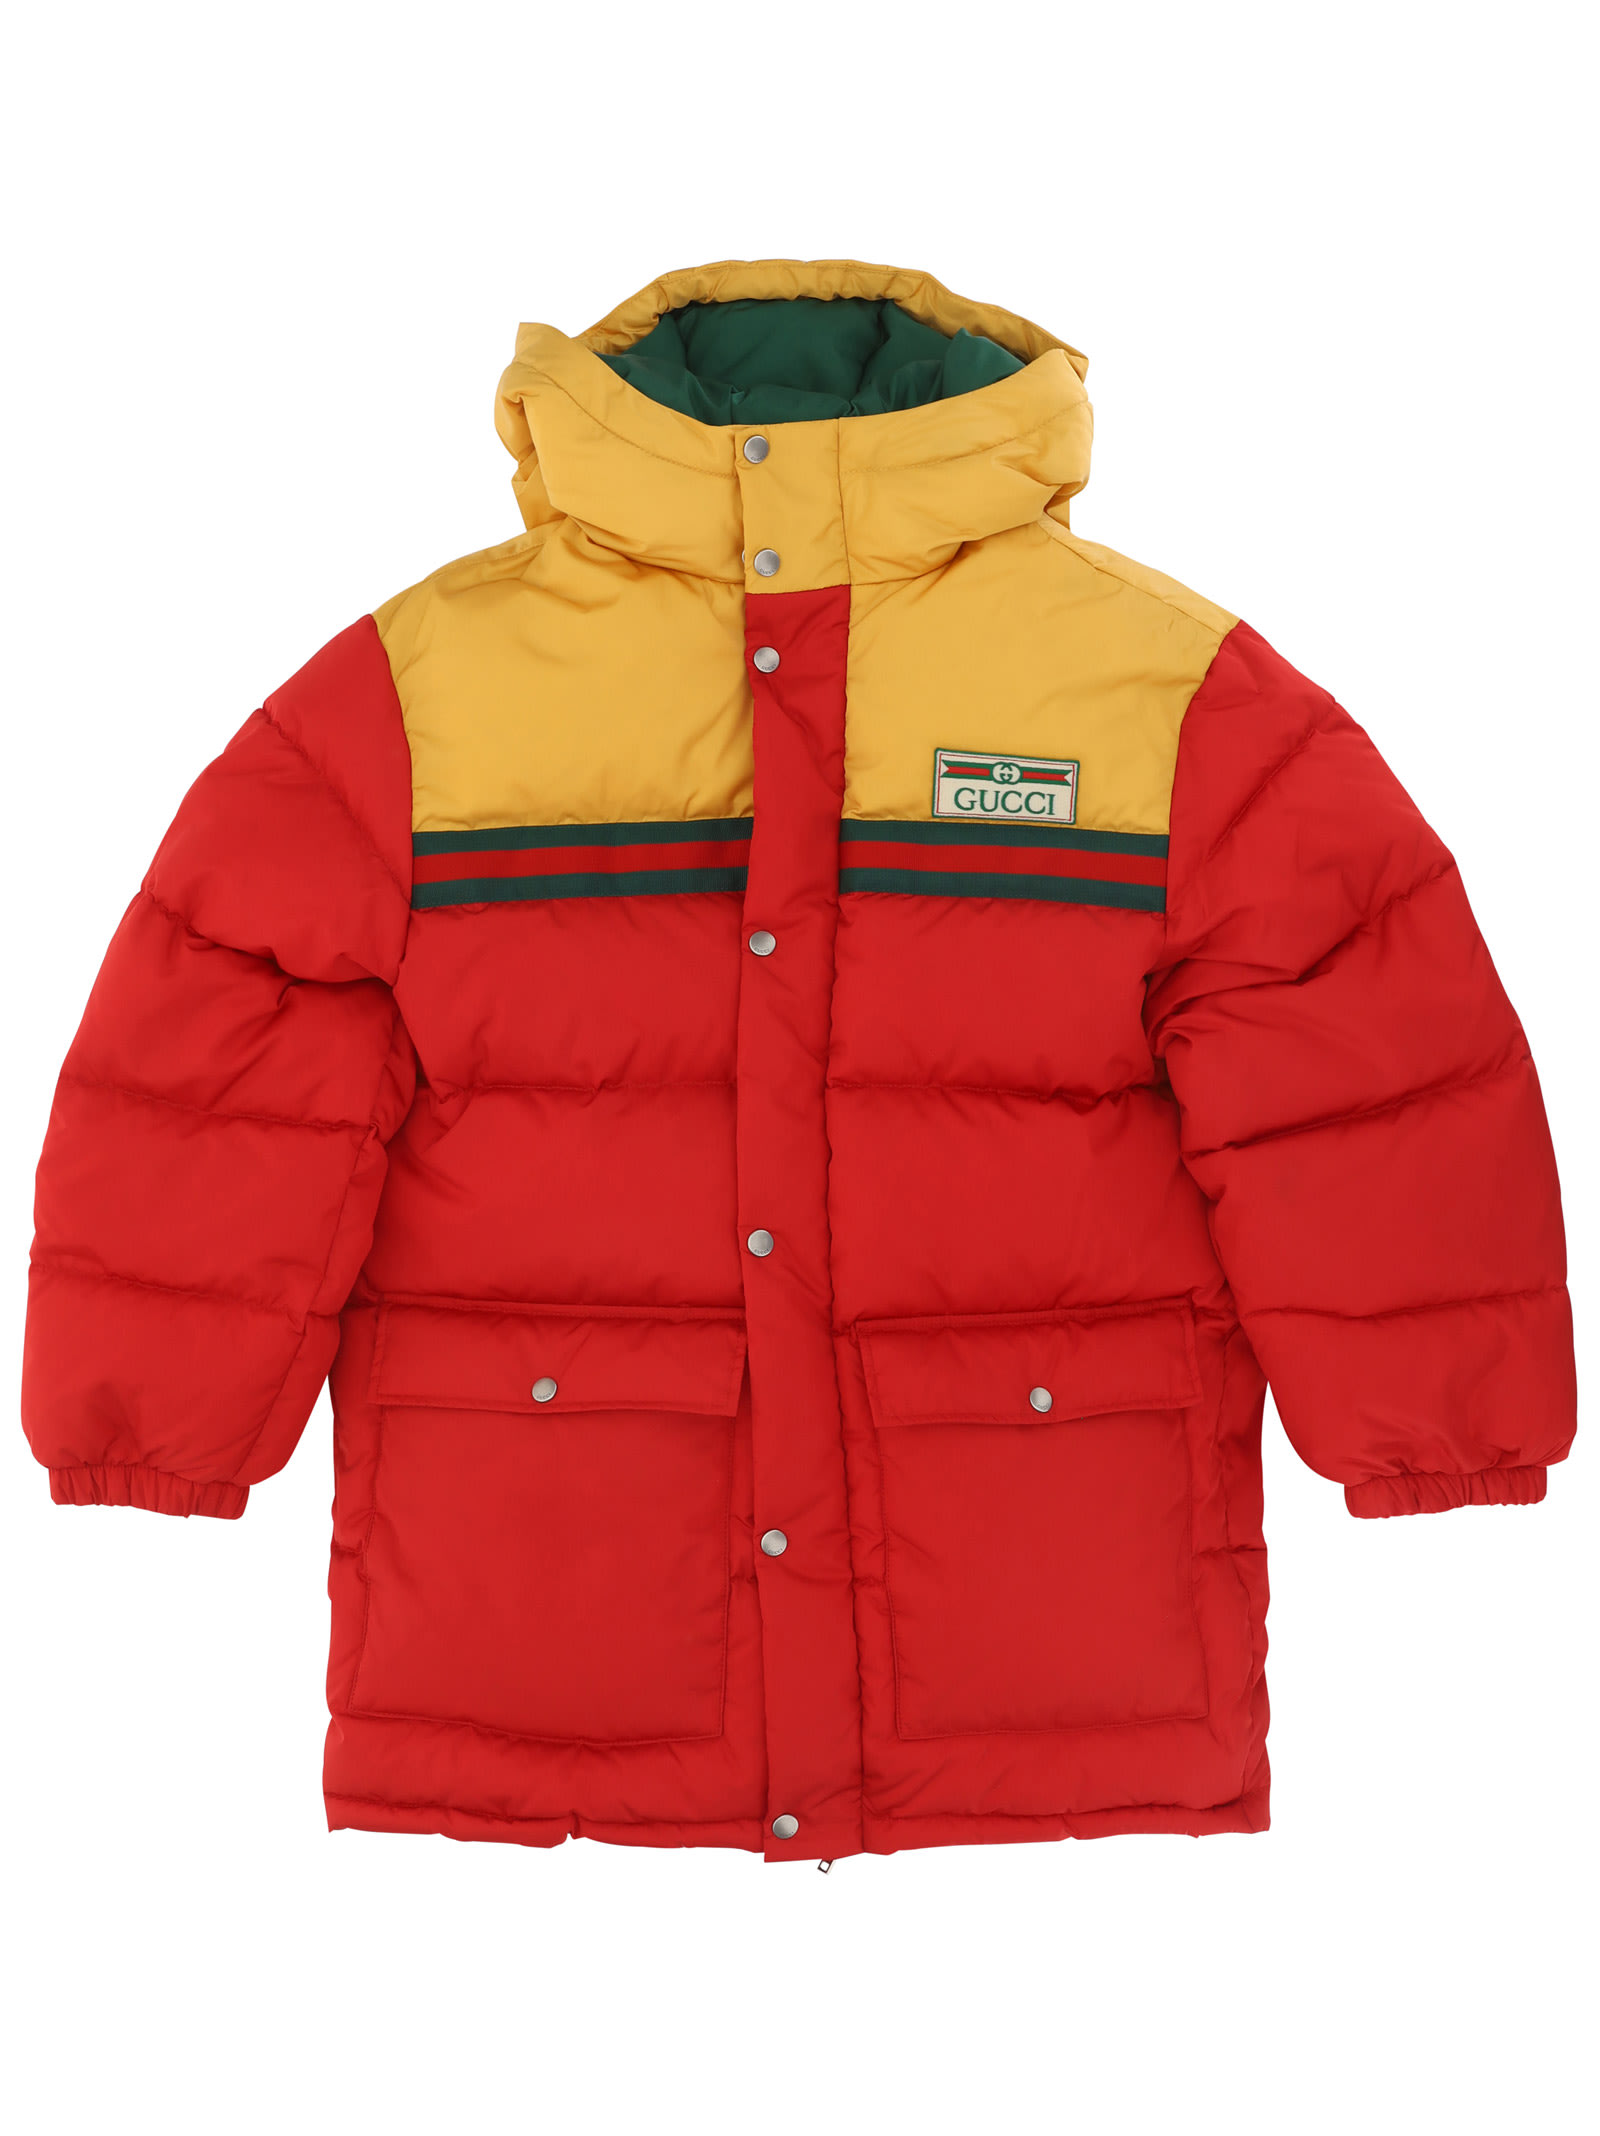 GUCCI DOWN JACKET FOR GUY